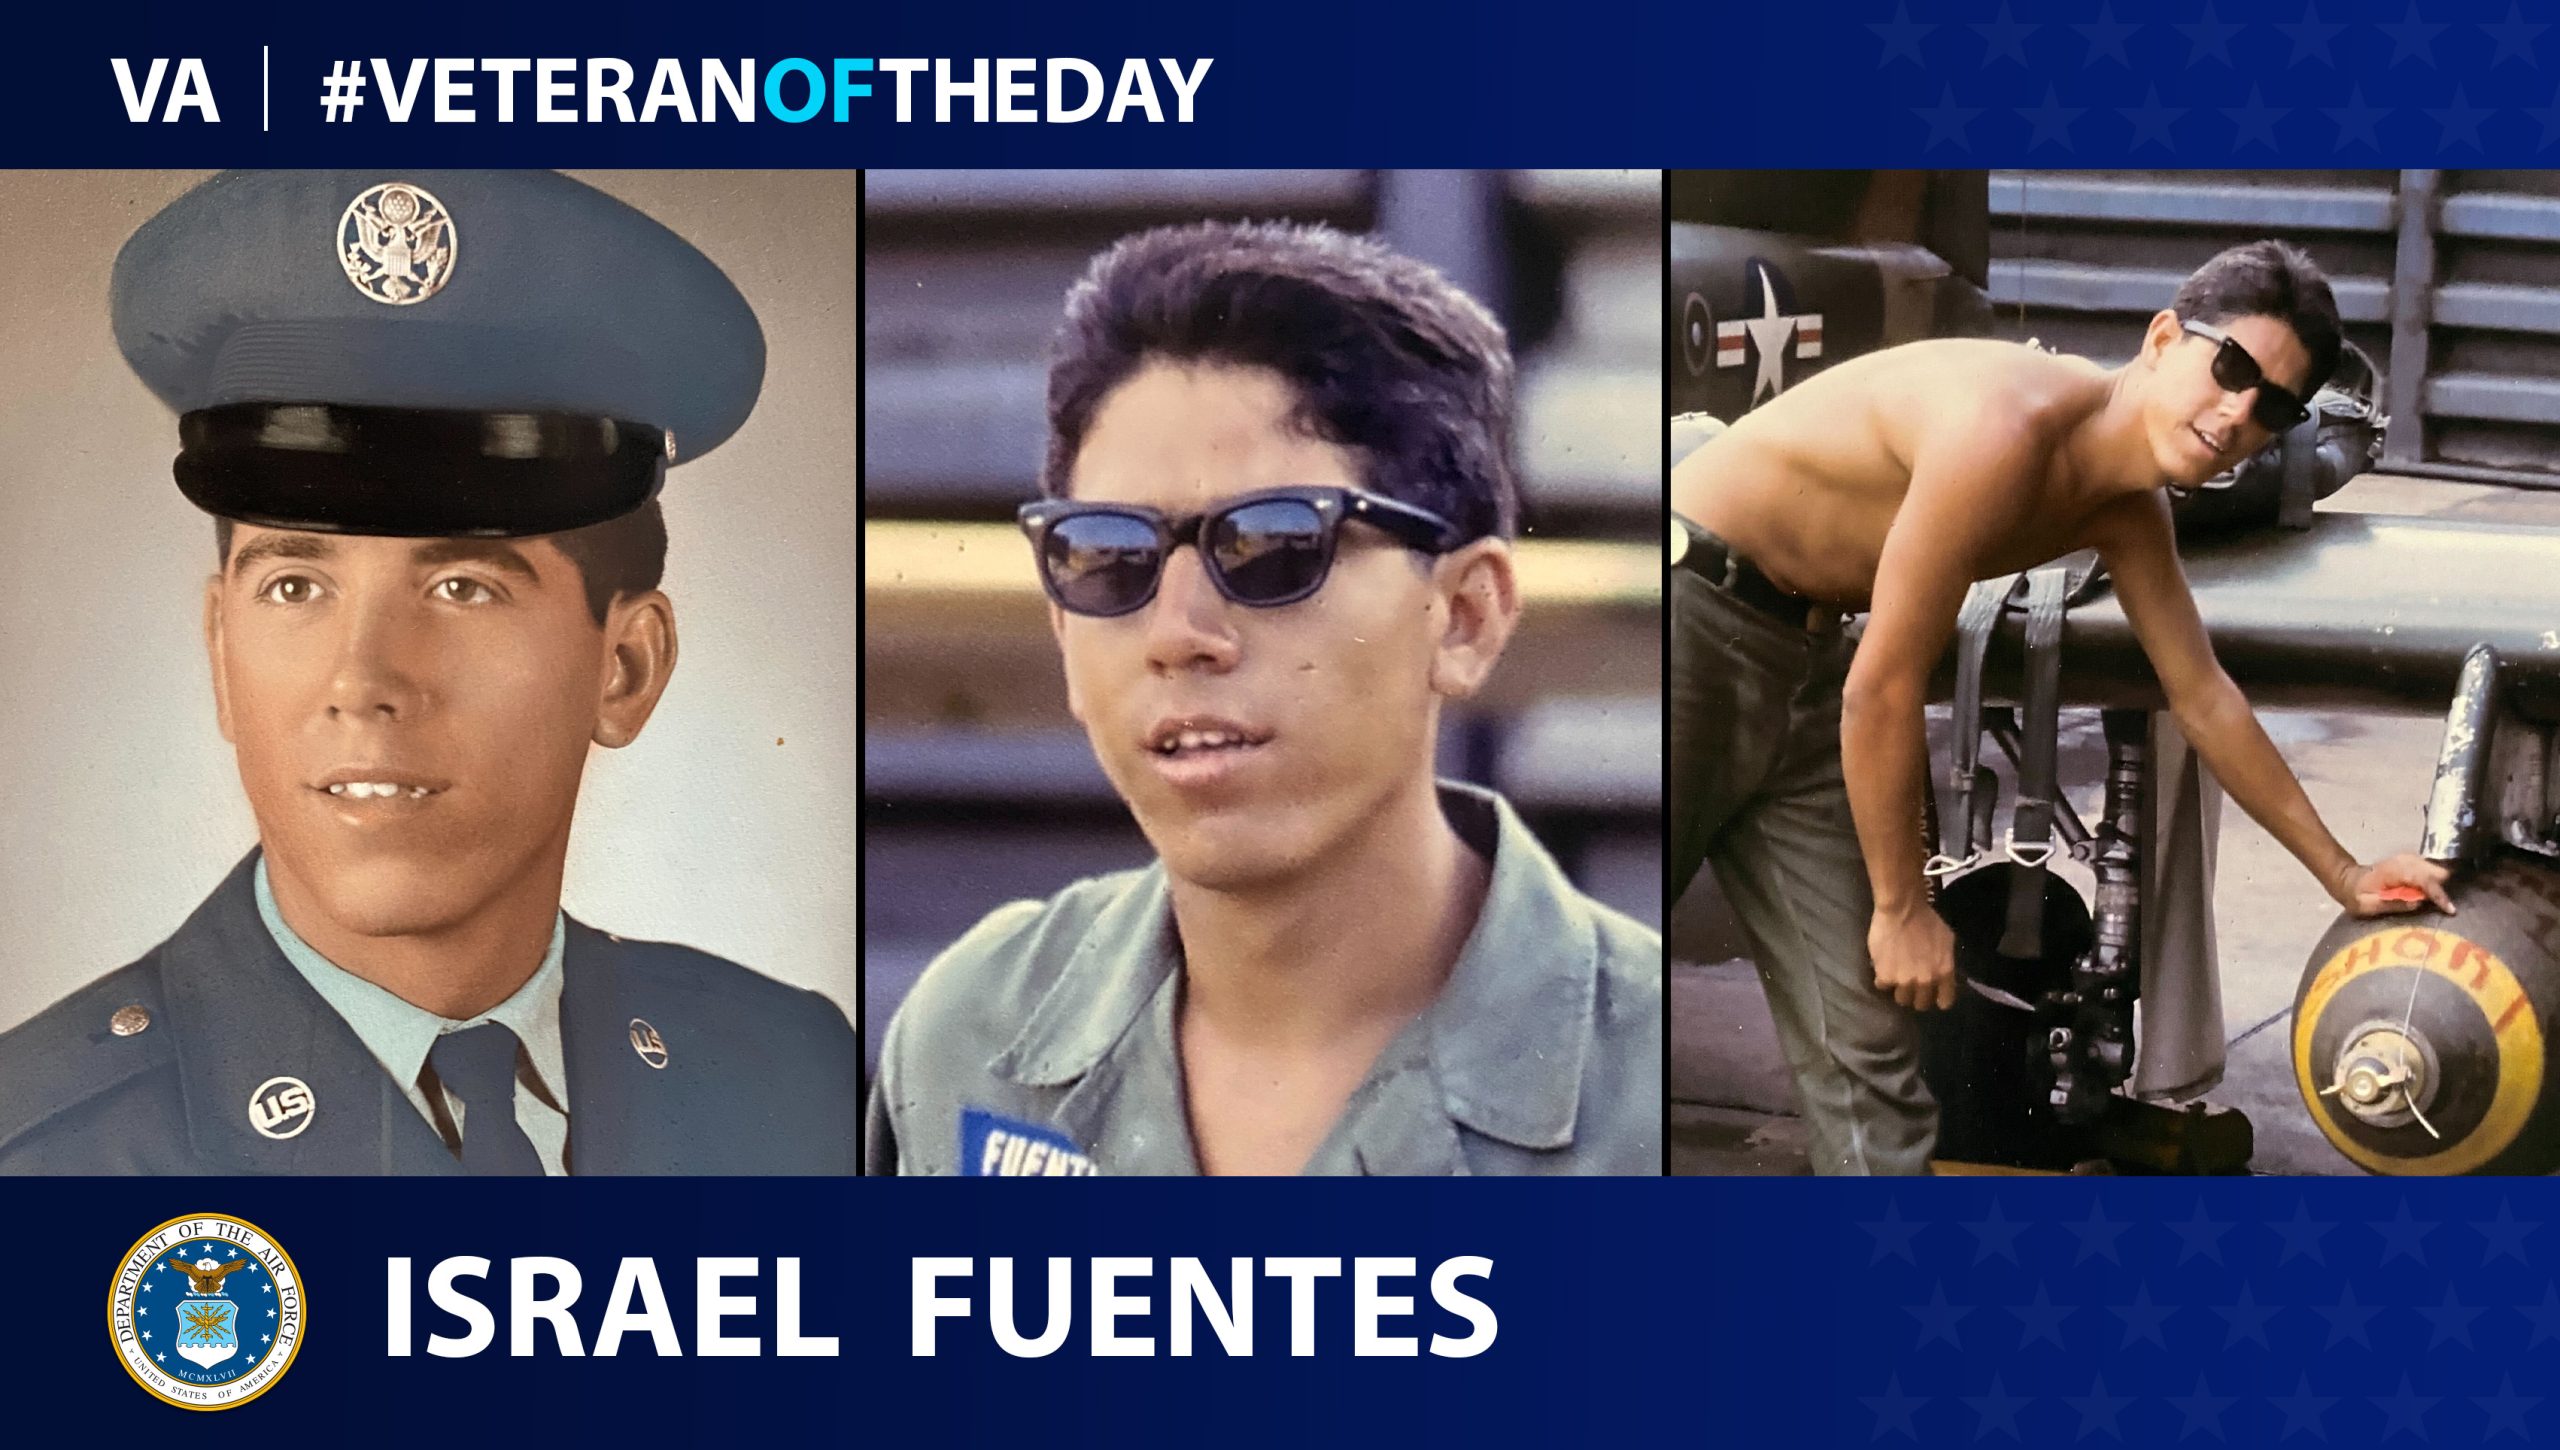 Veteran of the Day...Israel Fuentes